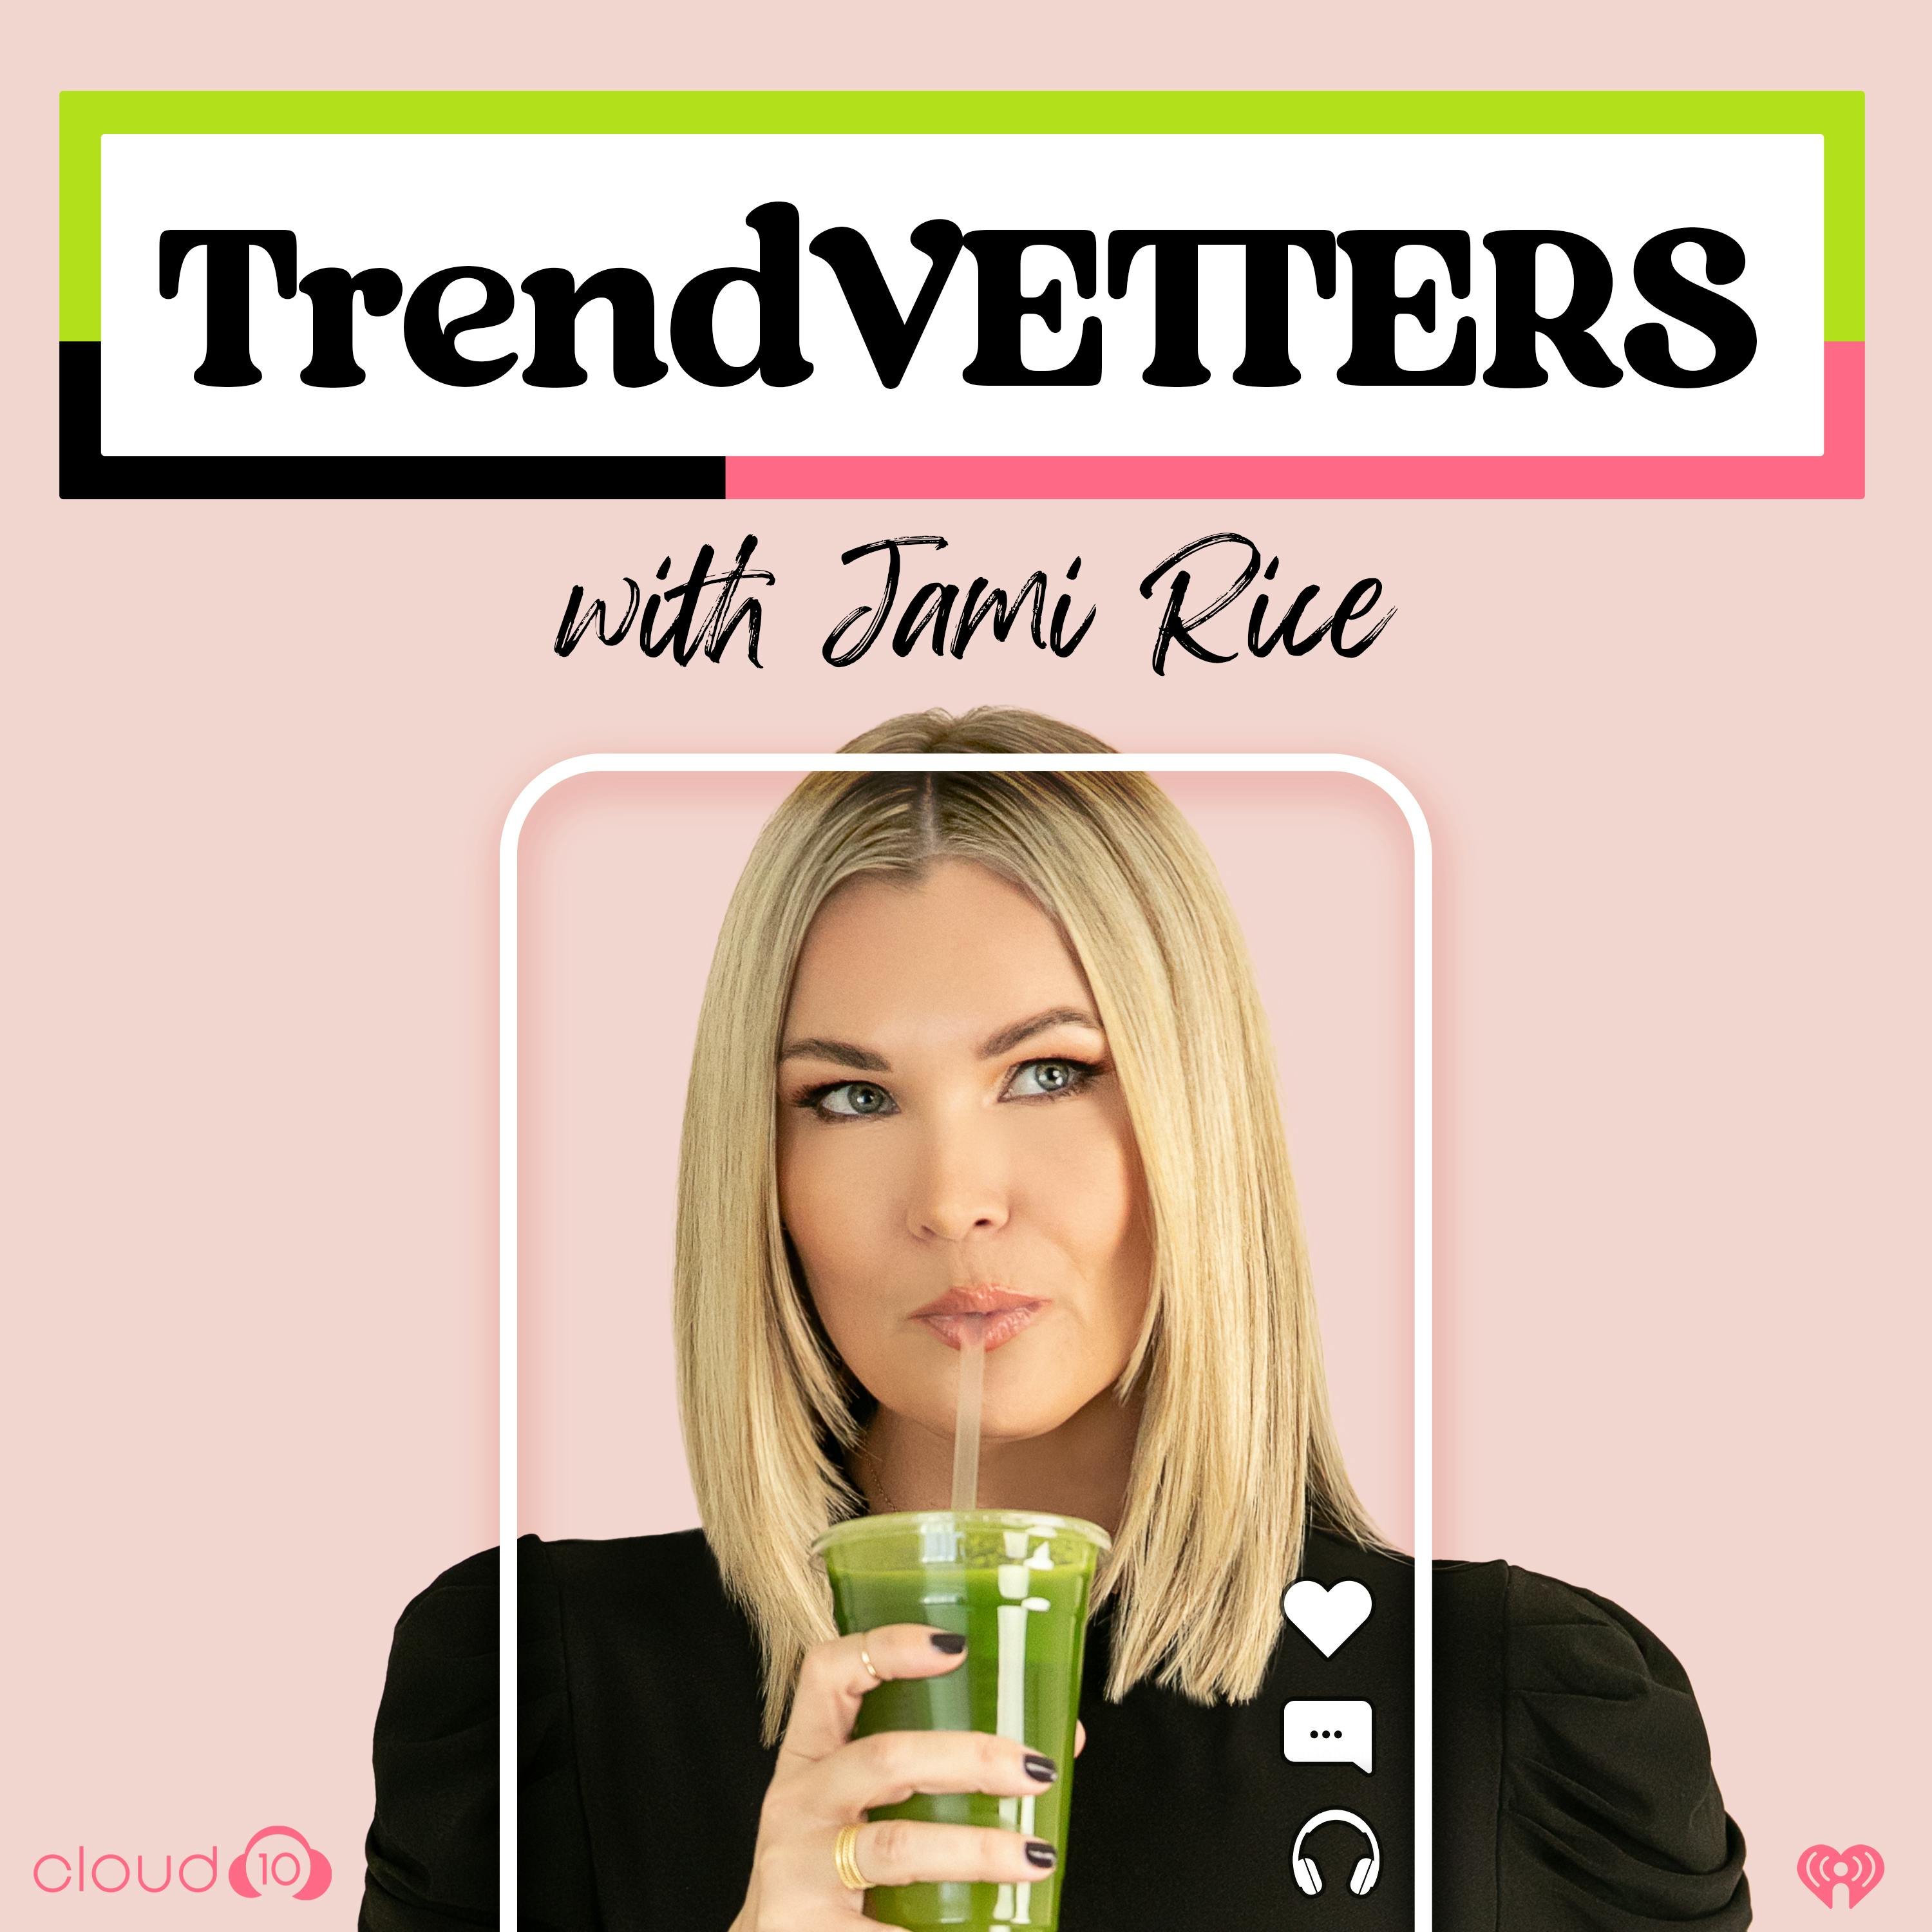 Introducing: TrendVETTERS with Jami Rice